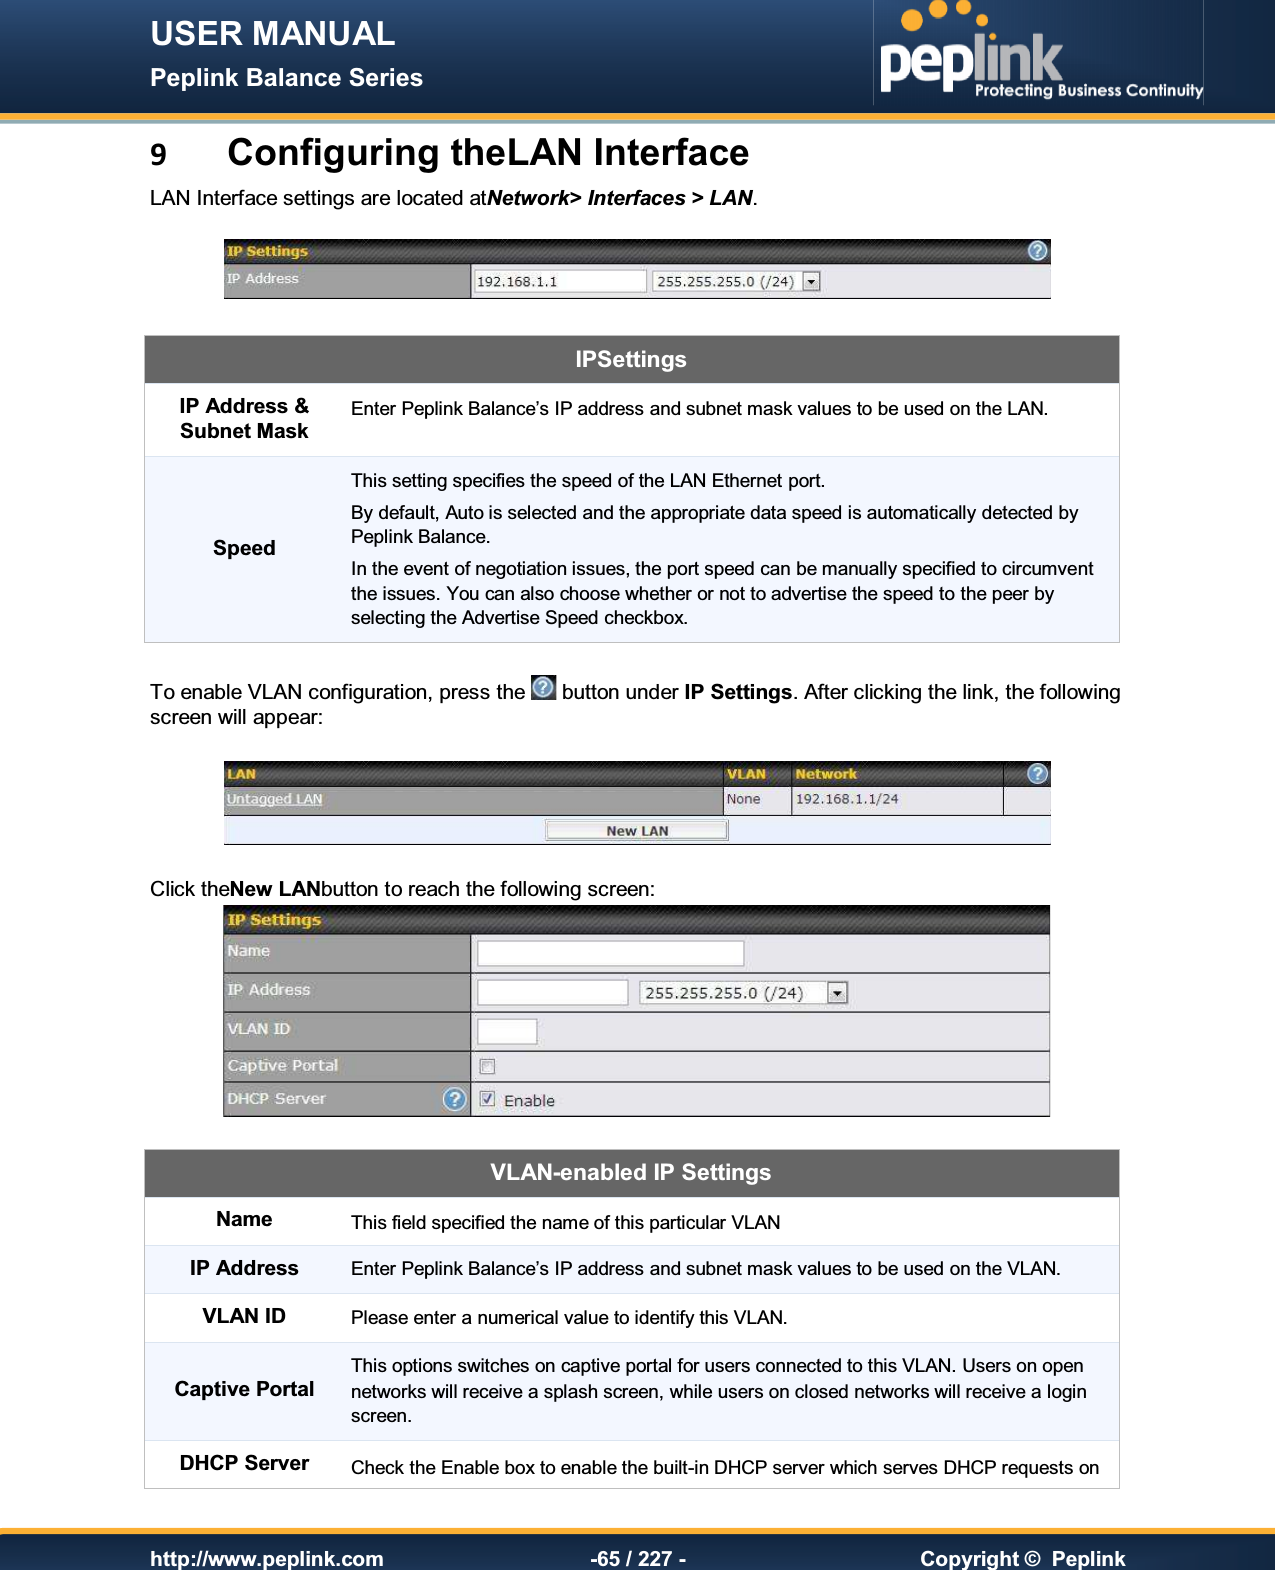 USER MANUAL Peplink Balance Series   http://www.peplink.com -65 / 227 -  Copyright ©  Peplink 9 Configuring theLAN Interface LAN Interface settings are located atNetwork&gt; Interfaces &gt; LAN.      IPSettings IP Address &amp; Subnet Mask Enter Peplink Balance’s IP address and subnet mask values to be used on the LAN. Speed This setting specifies the speed of the LAN Ethernet port.   By default, Auto is selected and the appropriate data speed is automatically detected by Peplink Balance. In the event of negotiation issues, the port speed can be manually specified to circumvent the issues. You can also choose whether or not to advertise the speed to the peer by selecting the Advertise Speed checkbox.  To enable VLAN configuration, press the   button under IP Settings. After clicking the link, the following screen will appear:     Click theNew LANbutton to reach the following screen:  VLAN-enabled IP Settings Name This field specified the name of this particular VLAN IP Address Enter Peplink Balance’s IP address and subnet mask values to be used on the VLAN. VLAN ID Please enter a numerical value to identify this VLAN.  Captive Portal This options switches on captive portal for users connected to this VLAN. Users on open networks will receive a splash screen, while users on closed networks will receive a login screen. DHCP Server Check the Enable box to enable the built-in DHCP server which serves DHCP requests on 